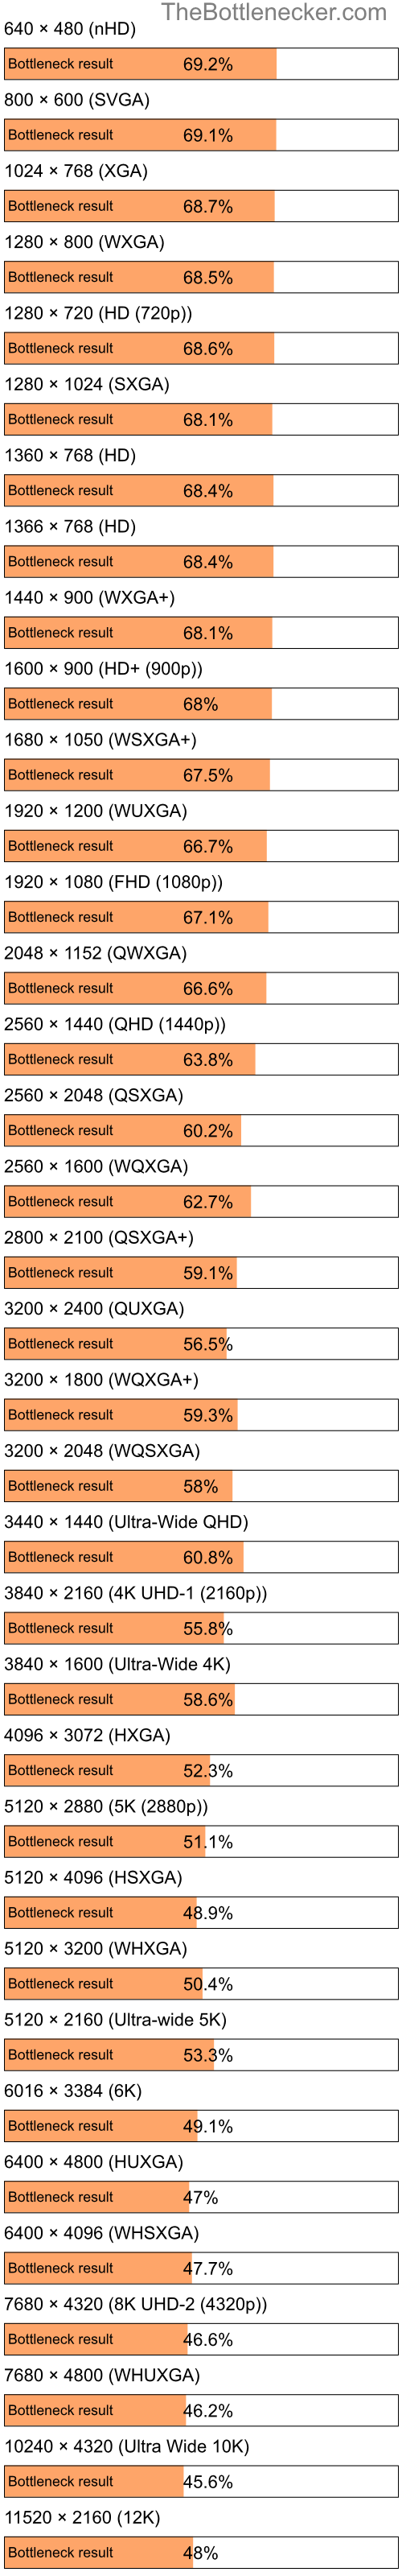 Bottleneck results by resolution for AMD Phenom X3 8550 and NVIDIA GeForce GTX 1080 in Graphic Card Intense Tasks